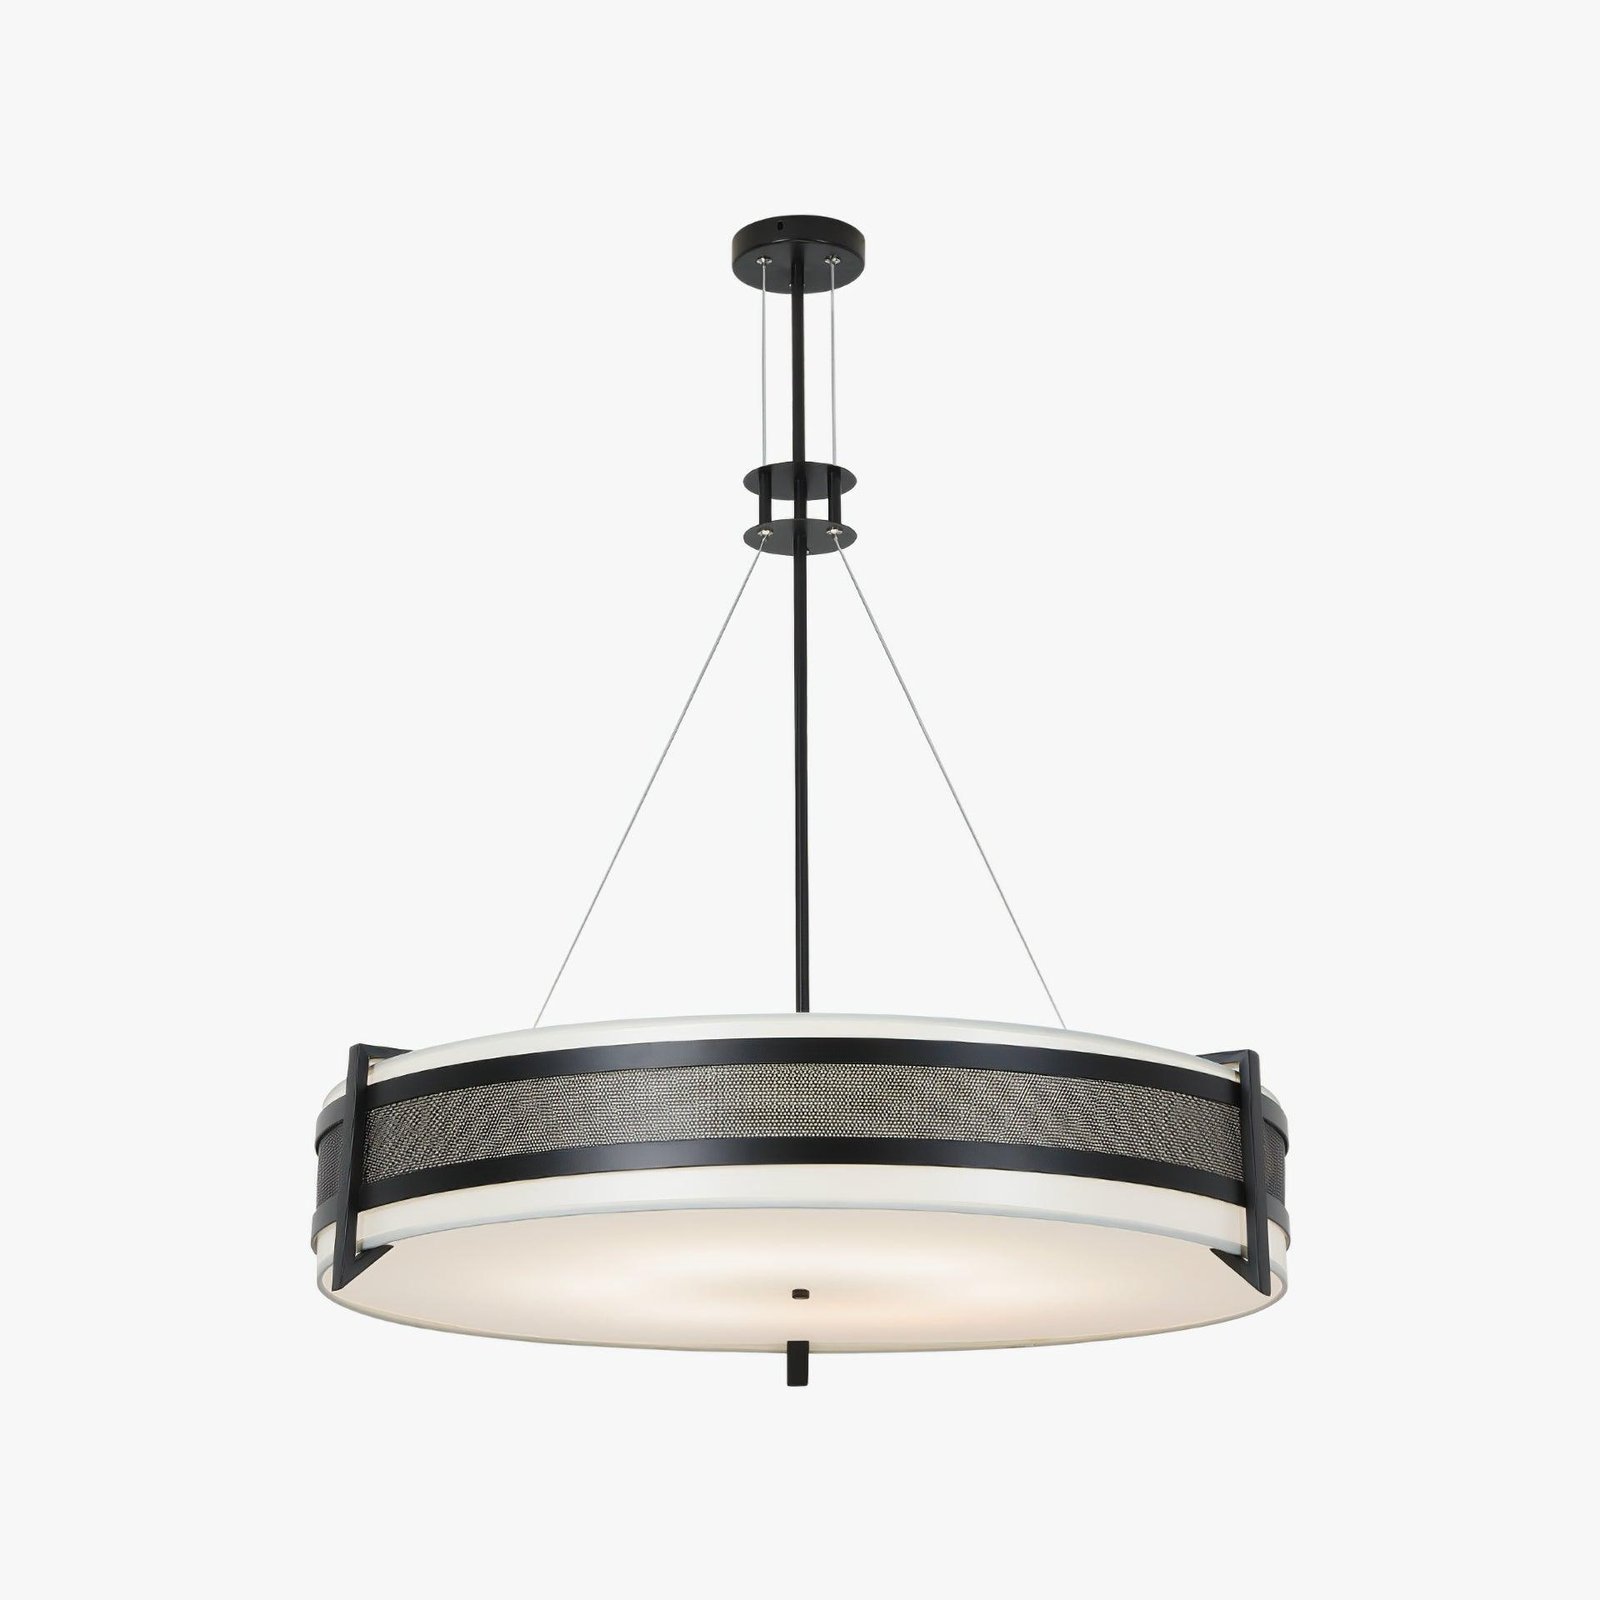 Black Pedesina Chandelier with a Diameter of 26.5 inches and Height of 30.7 inches (or 70cm x 78cm)